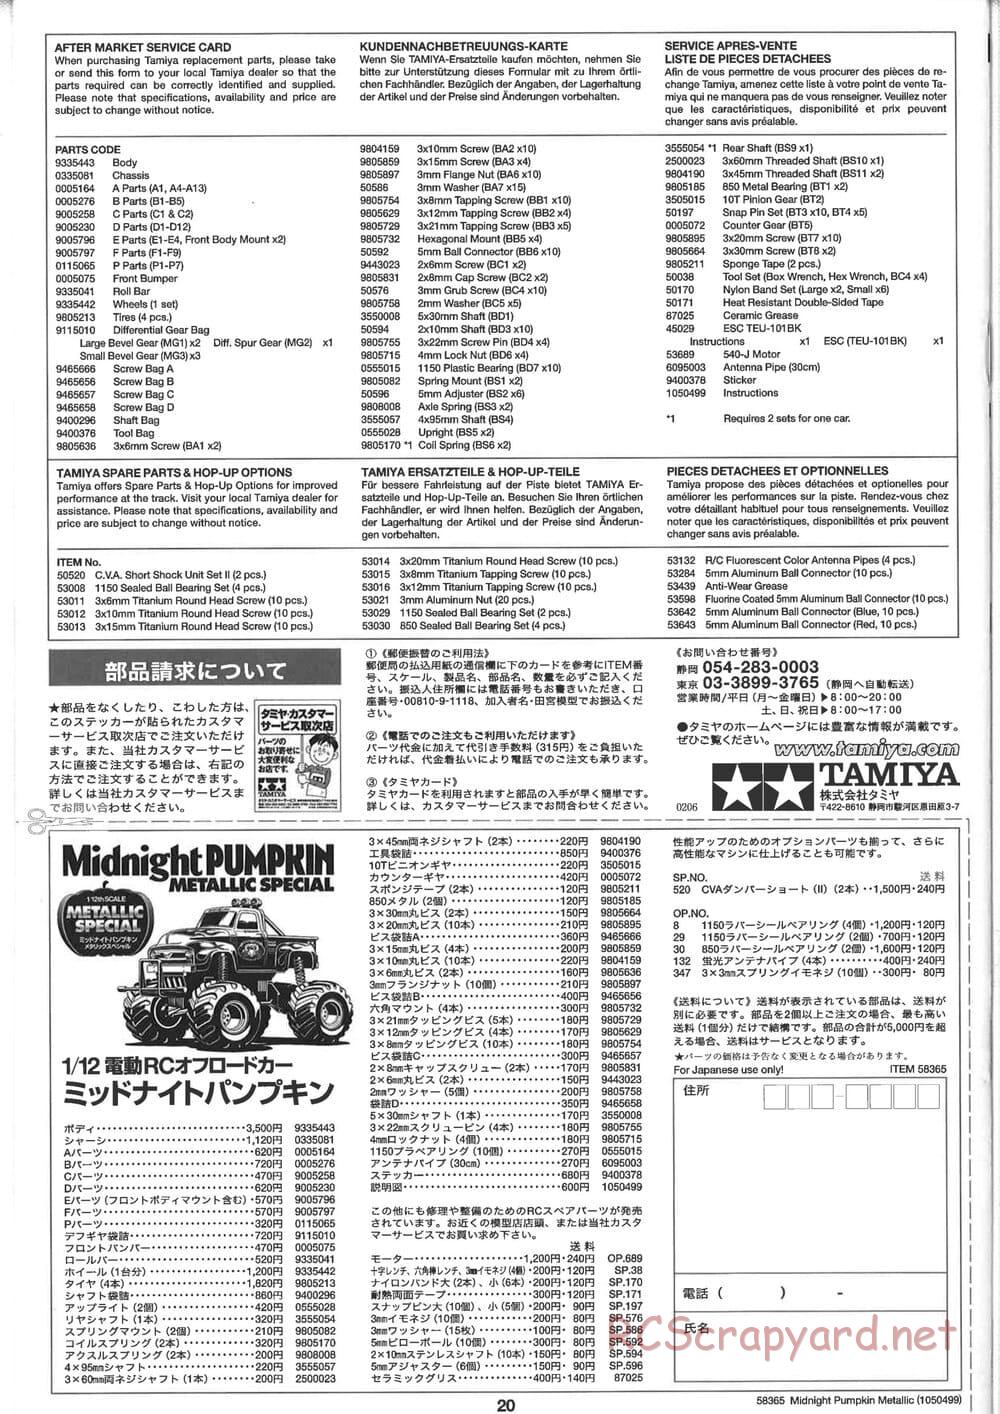 Tamiya - Midnight Pumpkin Chrome Metallic Special - CW-01 Chassis - Manual - Page 20